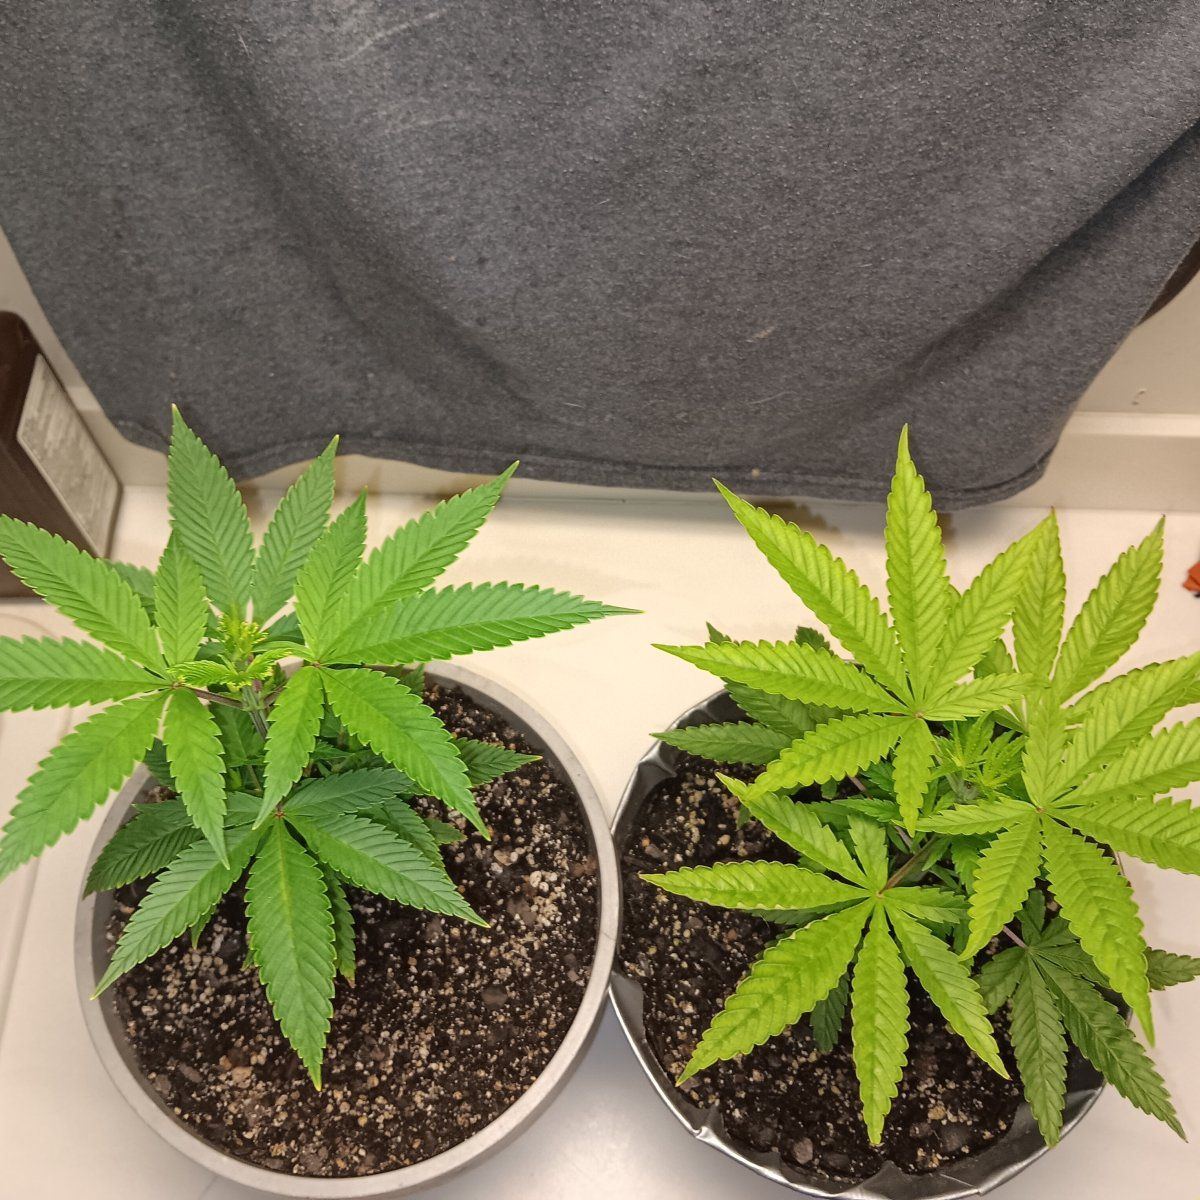 New growers question plants look too light in color on poor persons budget grow 3